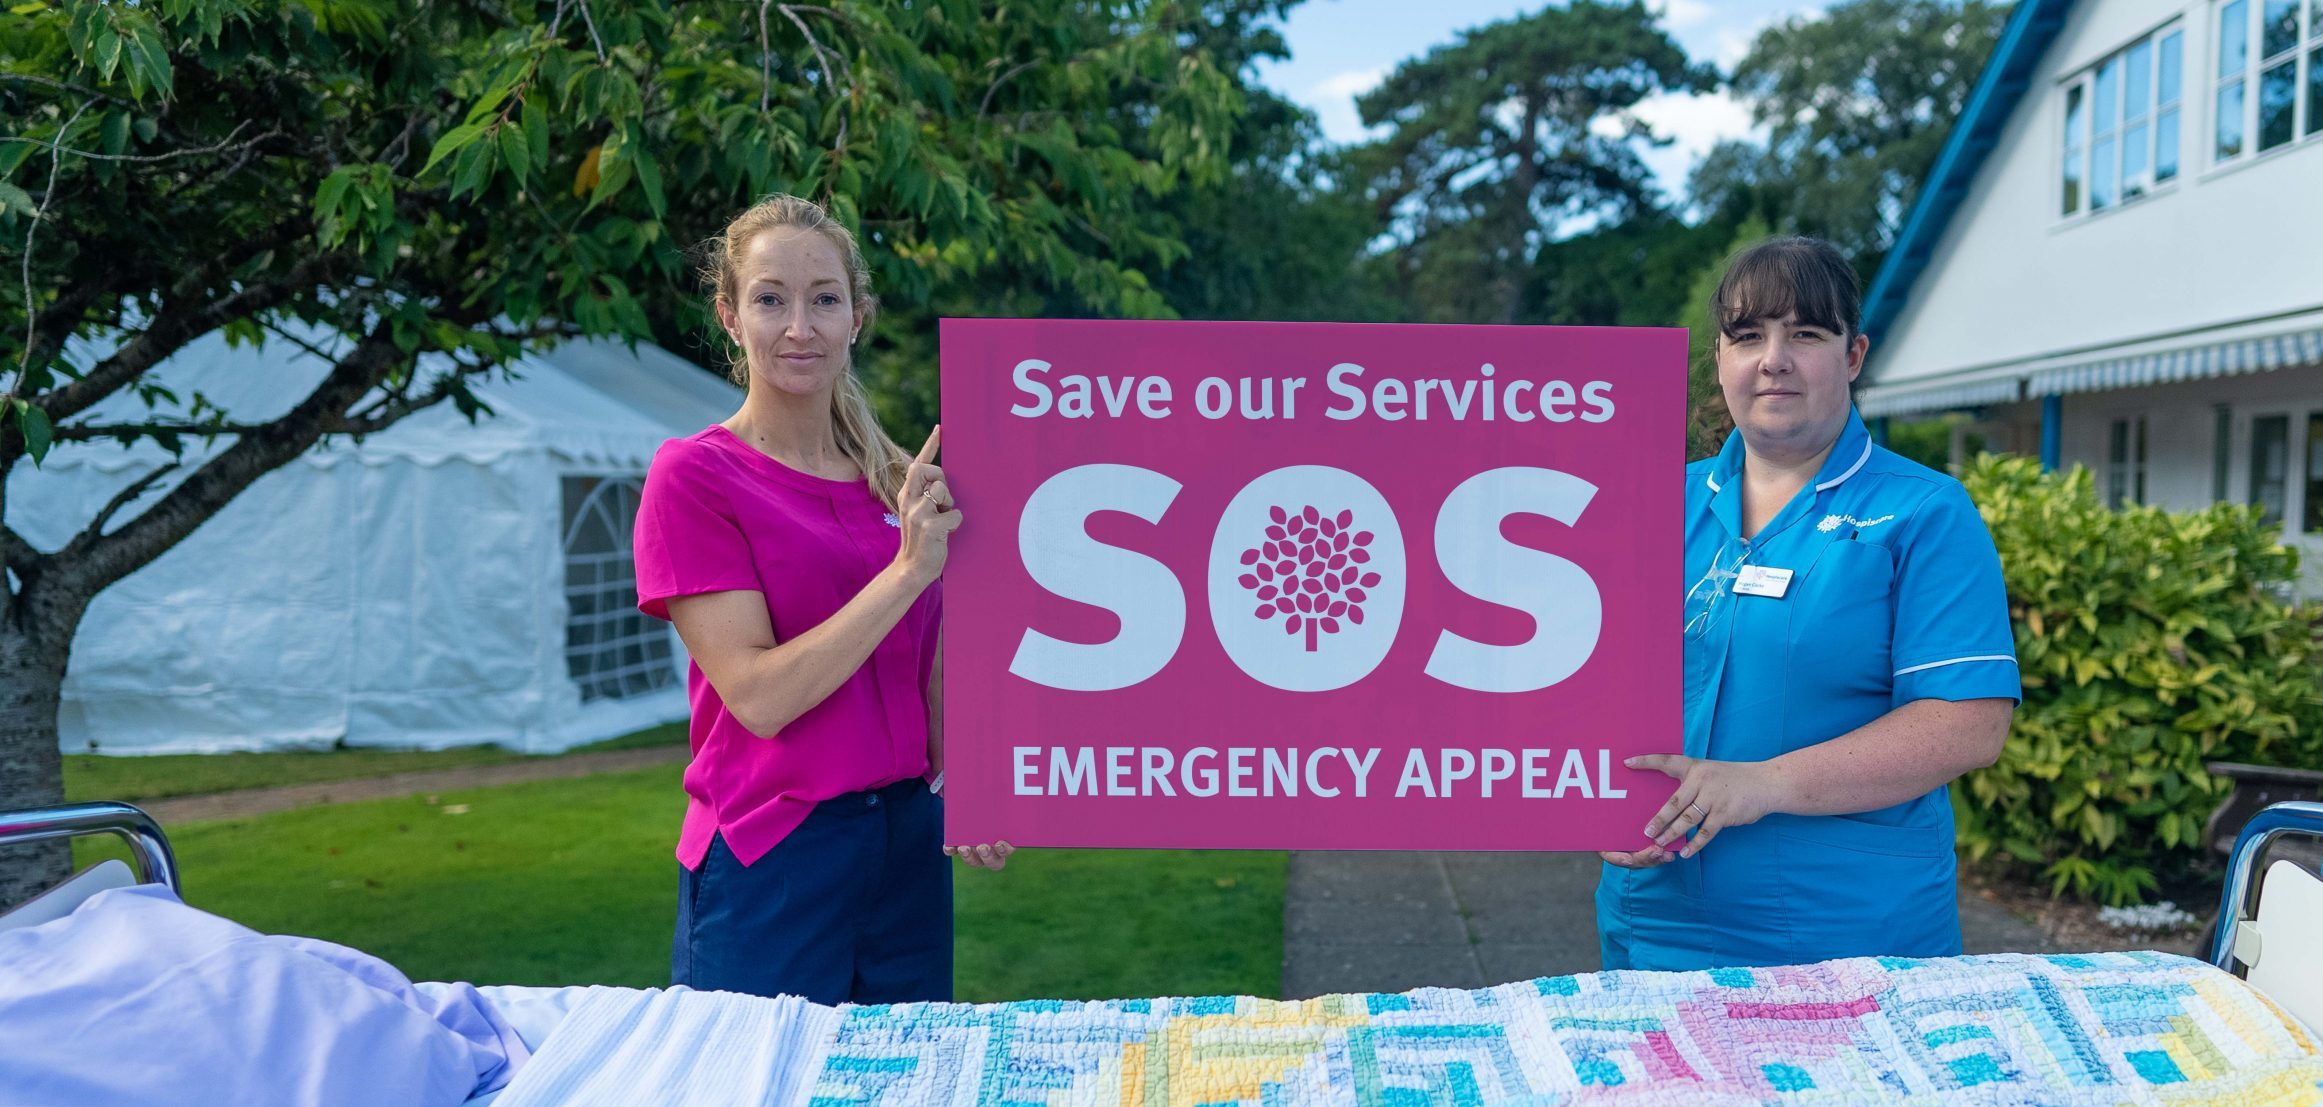 Hospiscare Launches ‘Save our Services’ Appeal